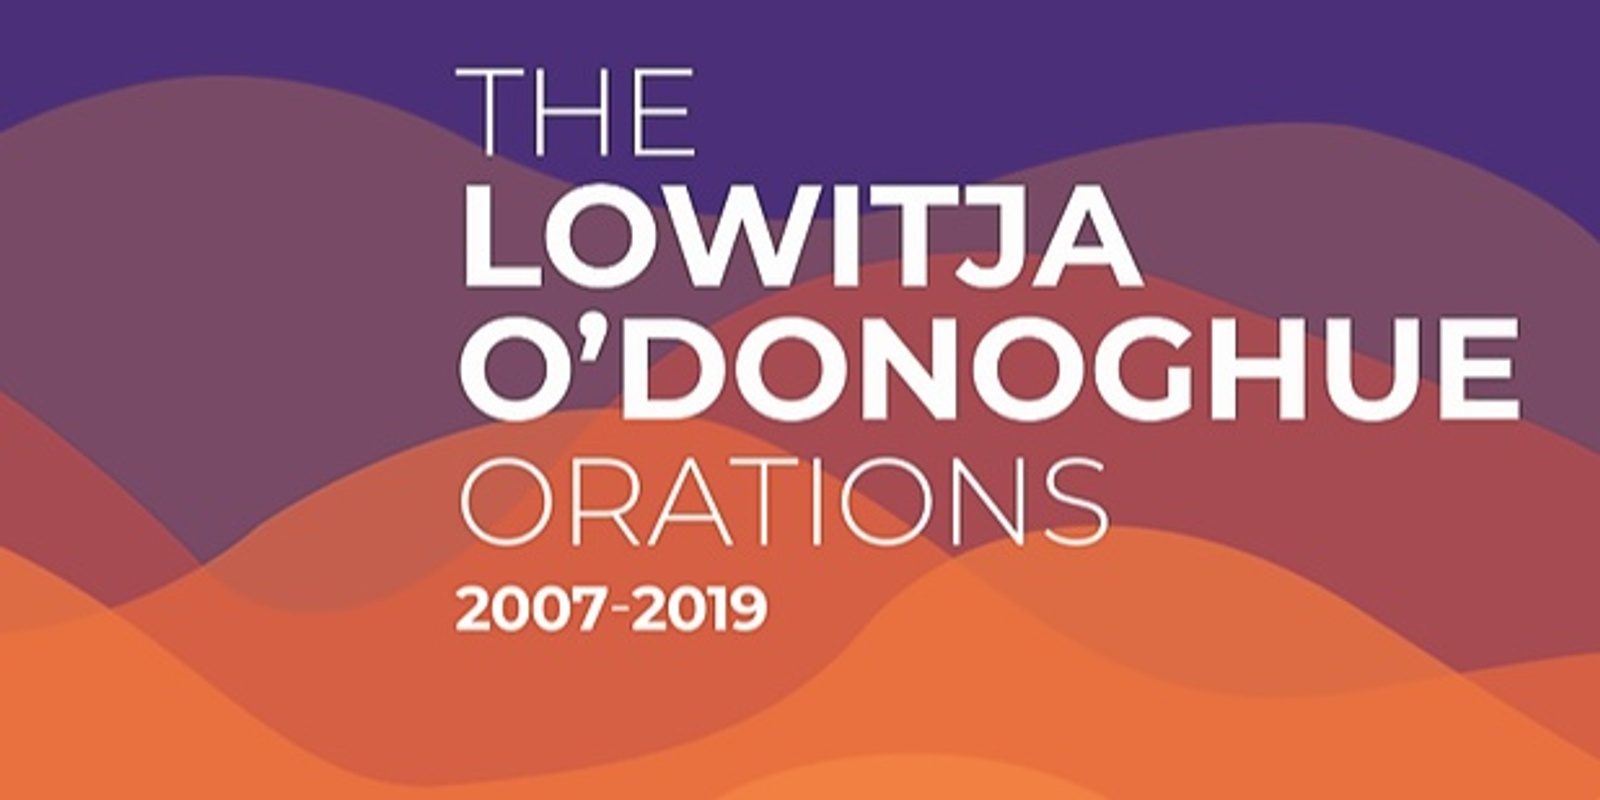 Lowitja O'Donoghue Orations: The Book